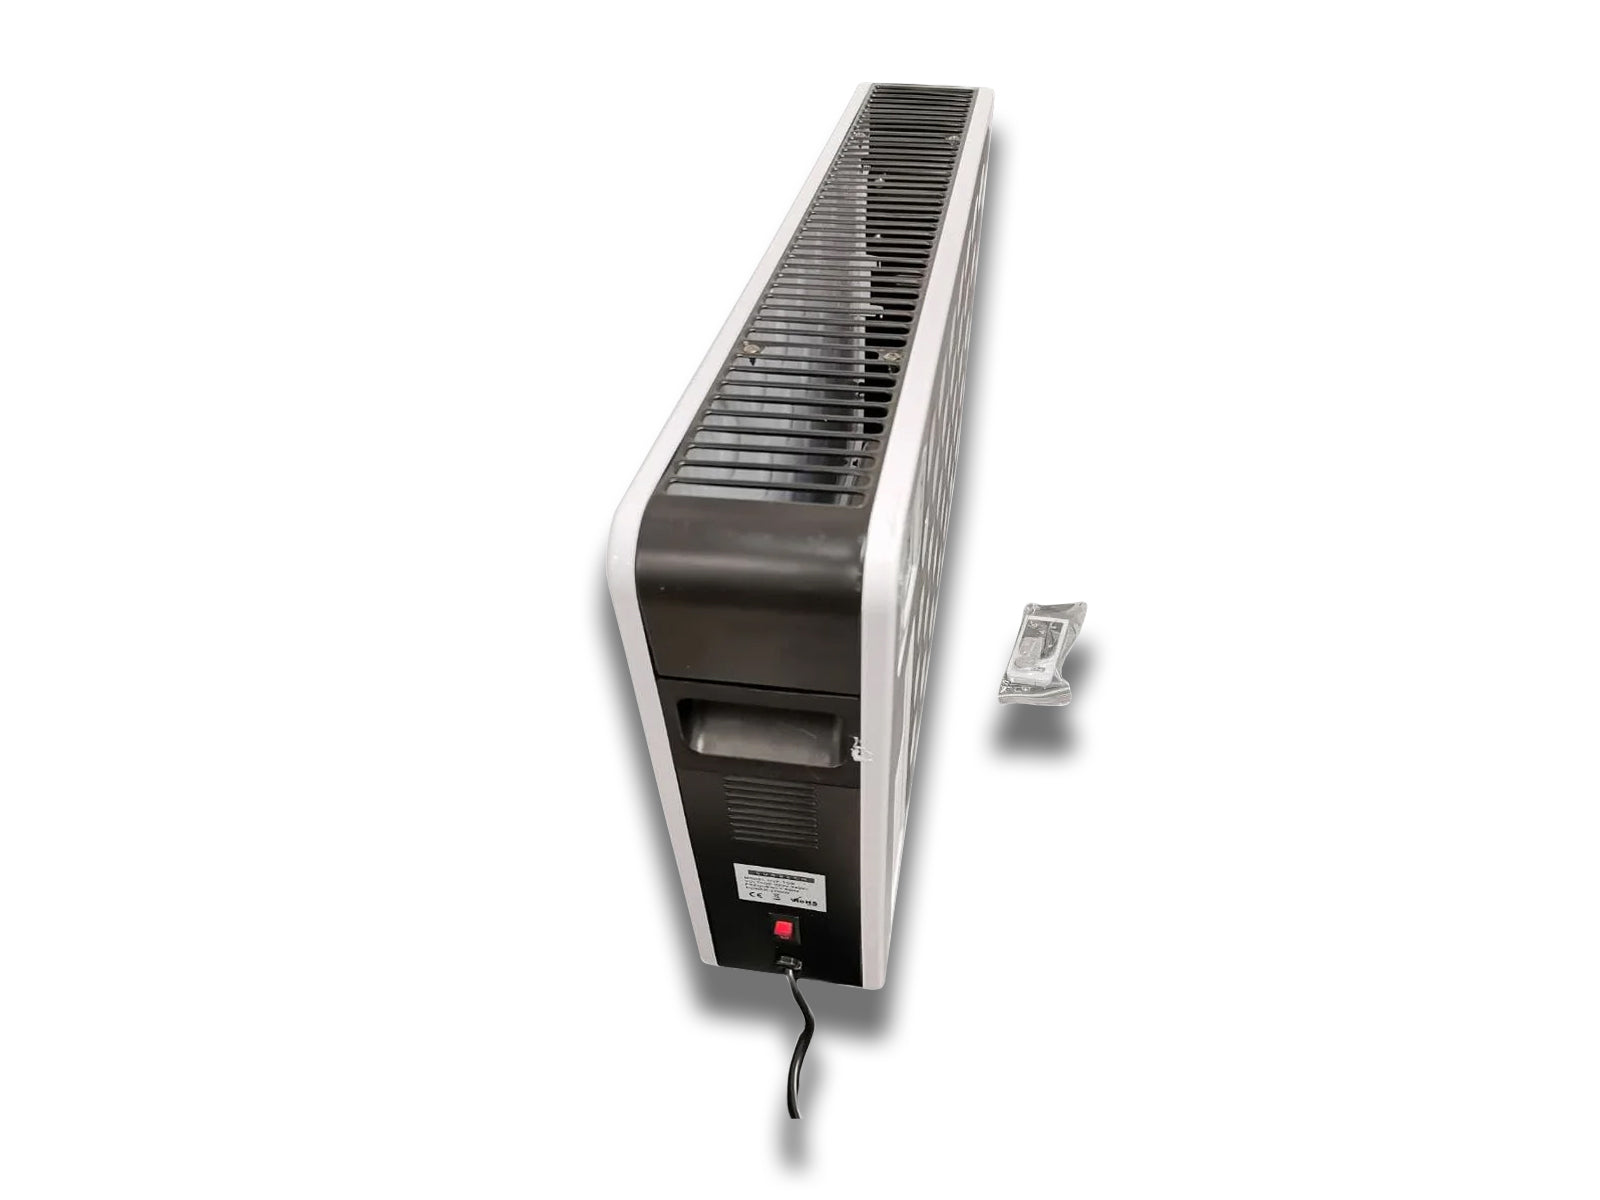 Top-left-side-view-angle-on-the-panel-heater-on-the-white-background